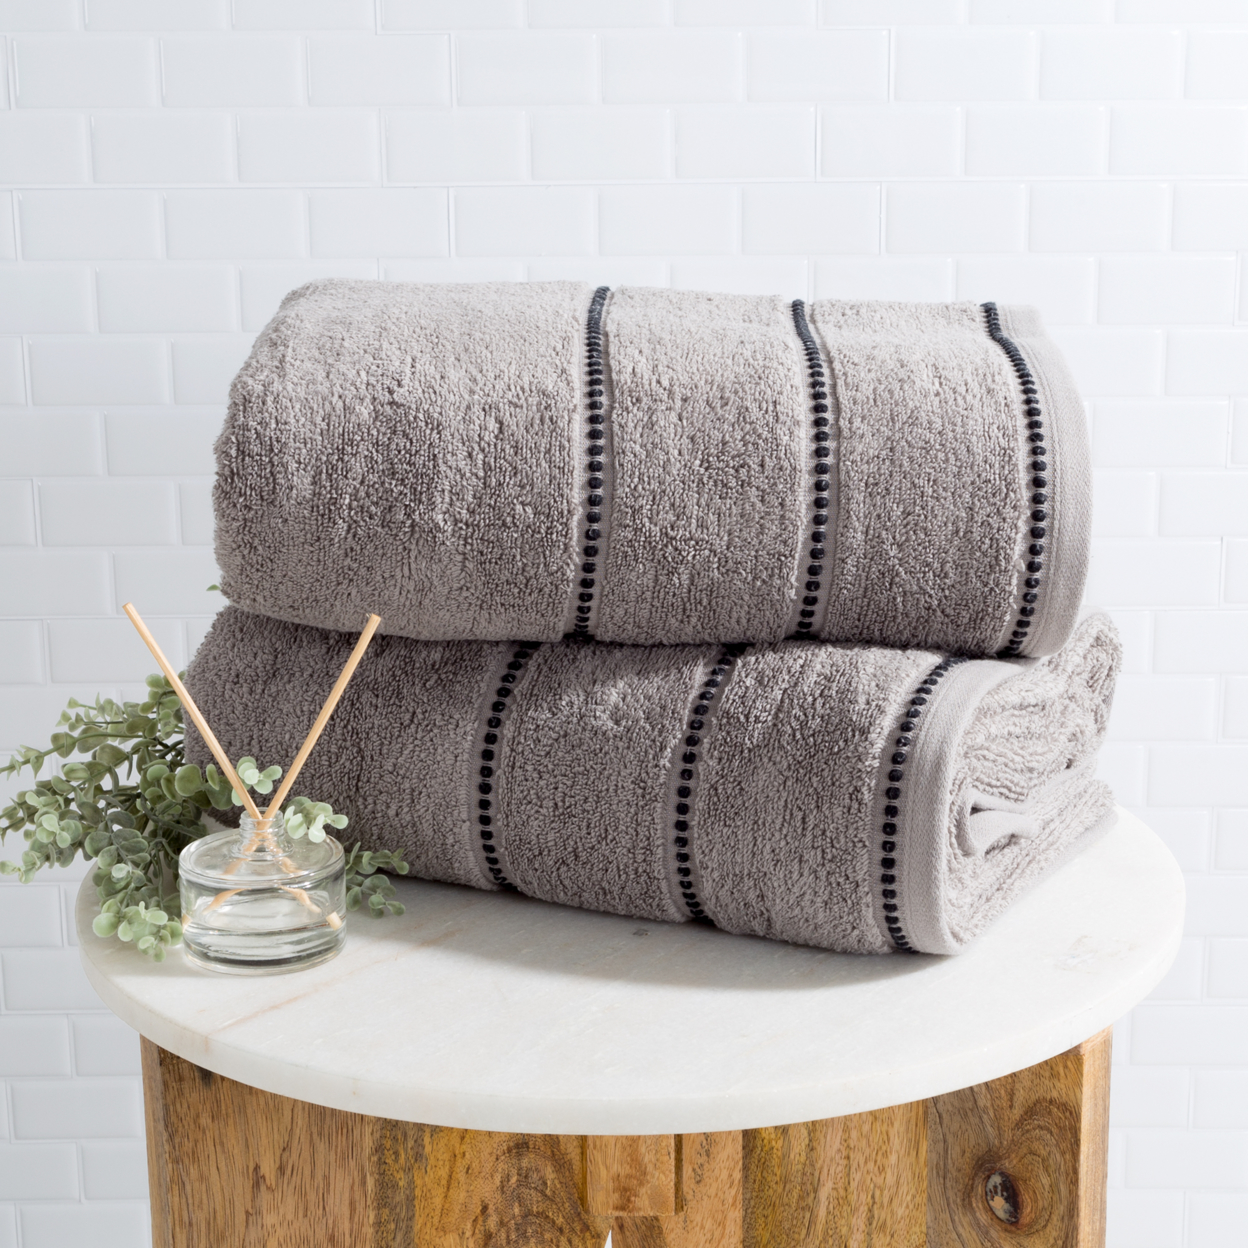 Luxurious Huge 34 X 68 In Cotton Towel Set- 2 Piece Bath Sheet Set Made From 100% Plush Cotton- Quick Dry, Soft And Absorbent Silver